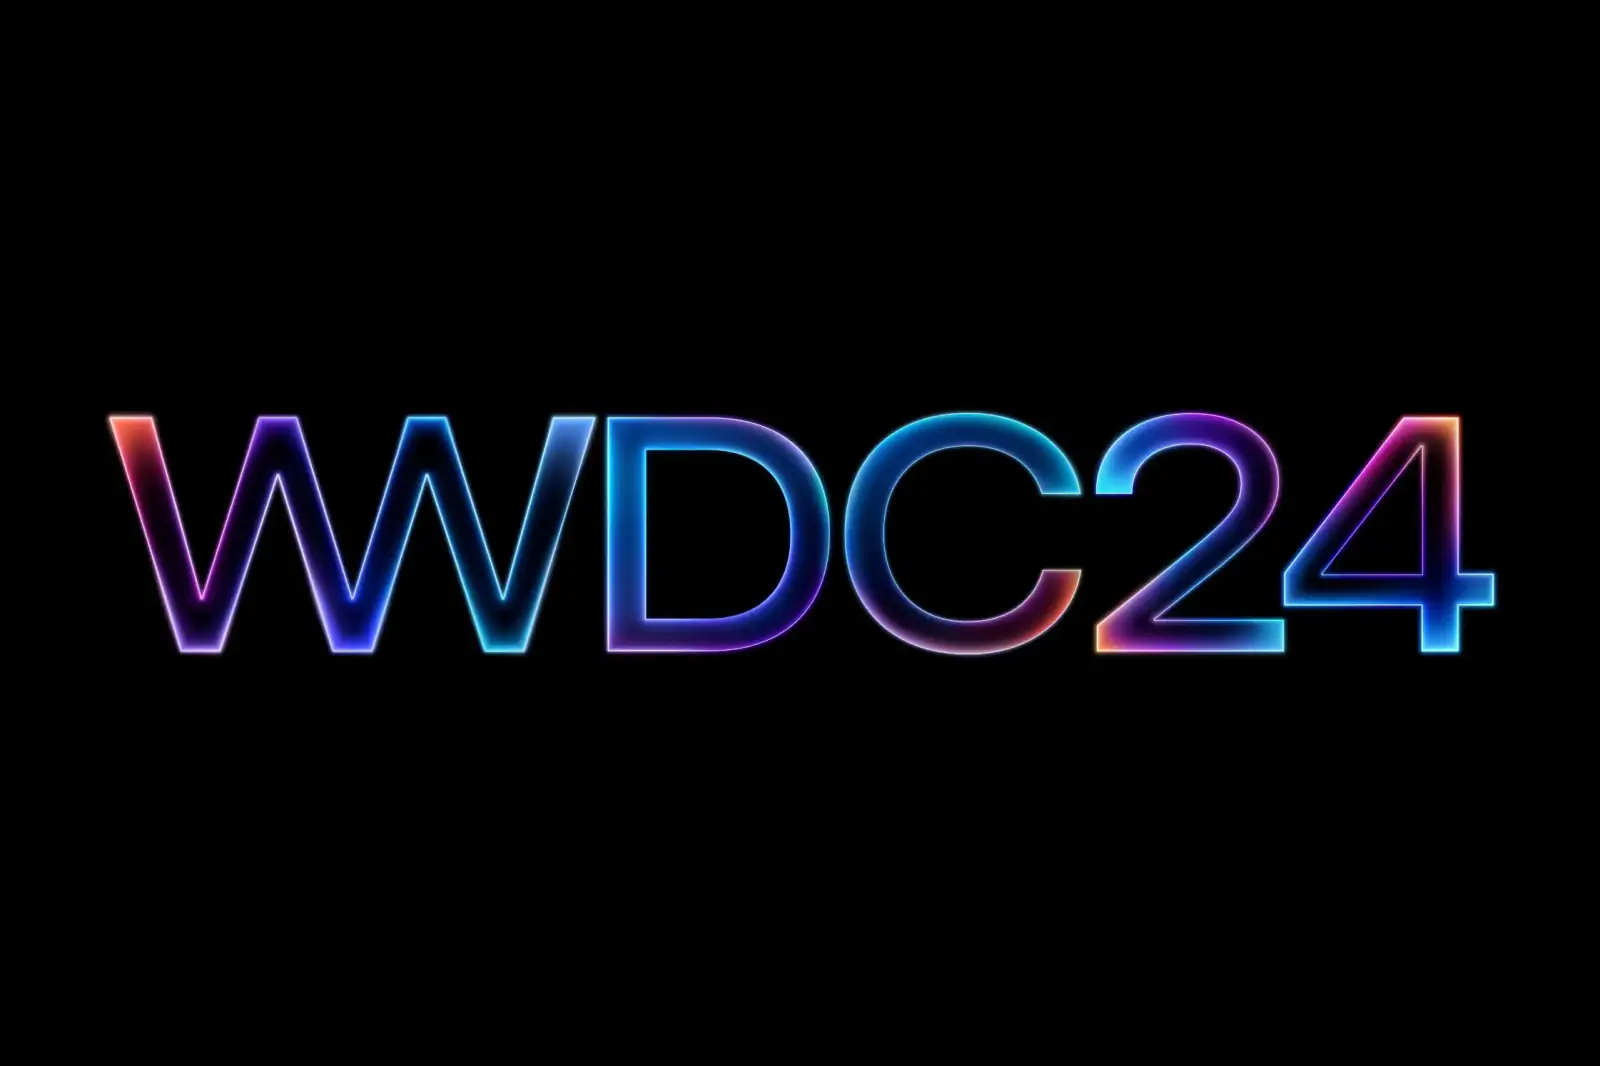 WWDC 2024: Biggest developers conference will start from June 10, all eyes will be on AI